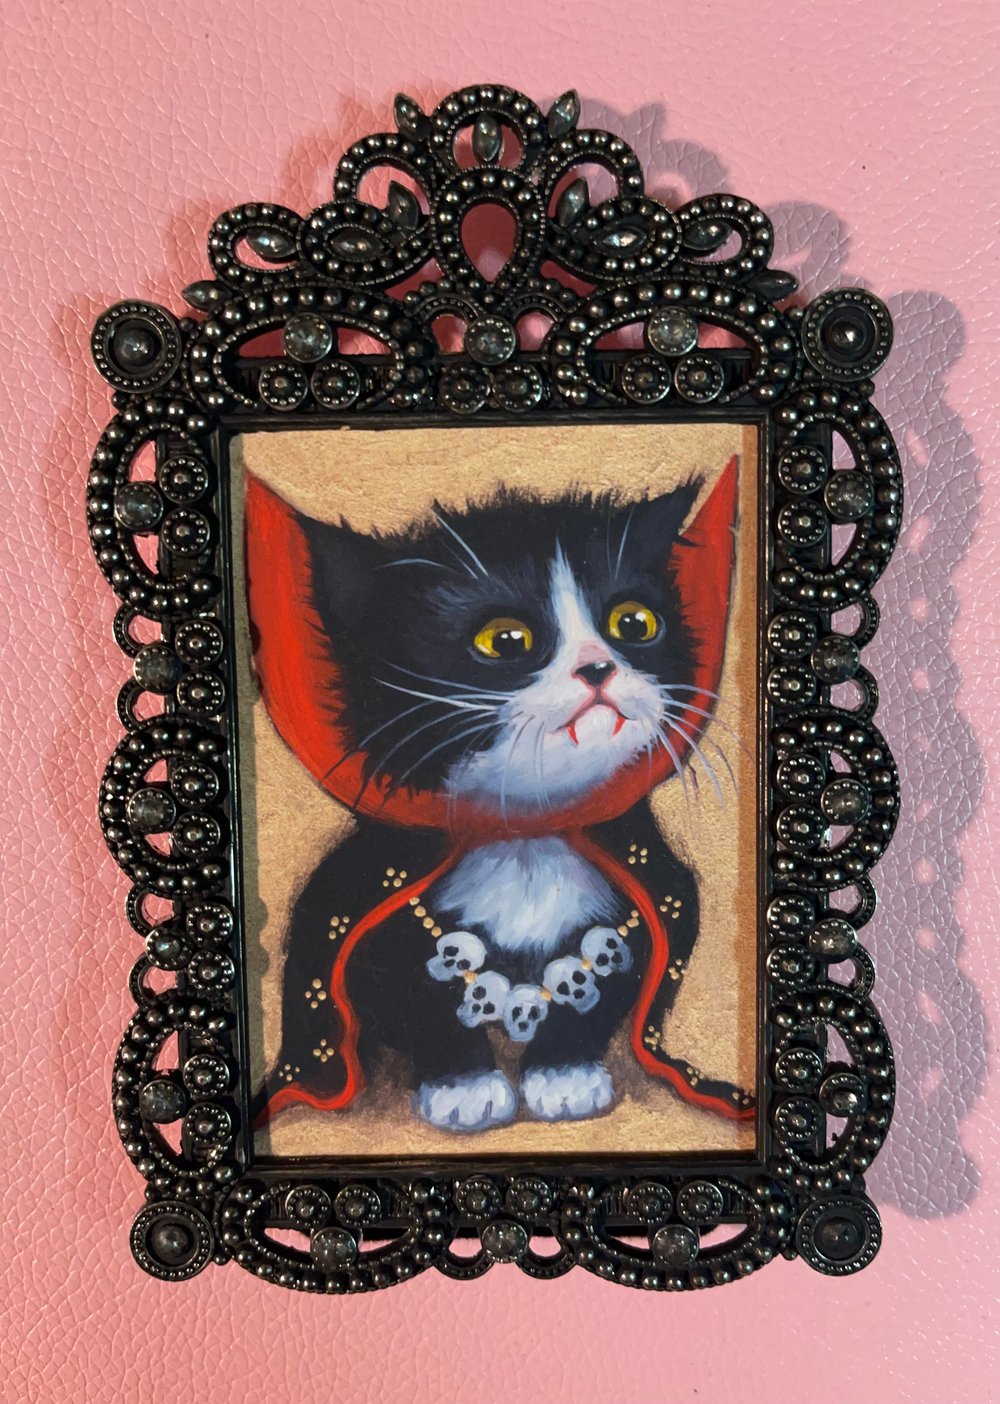 Image of "Count Catula" Framed print